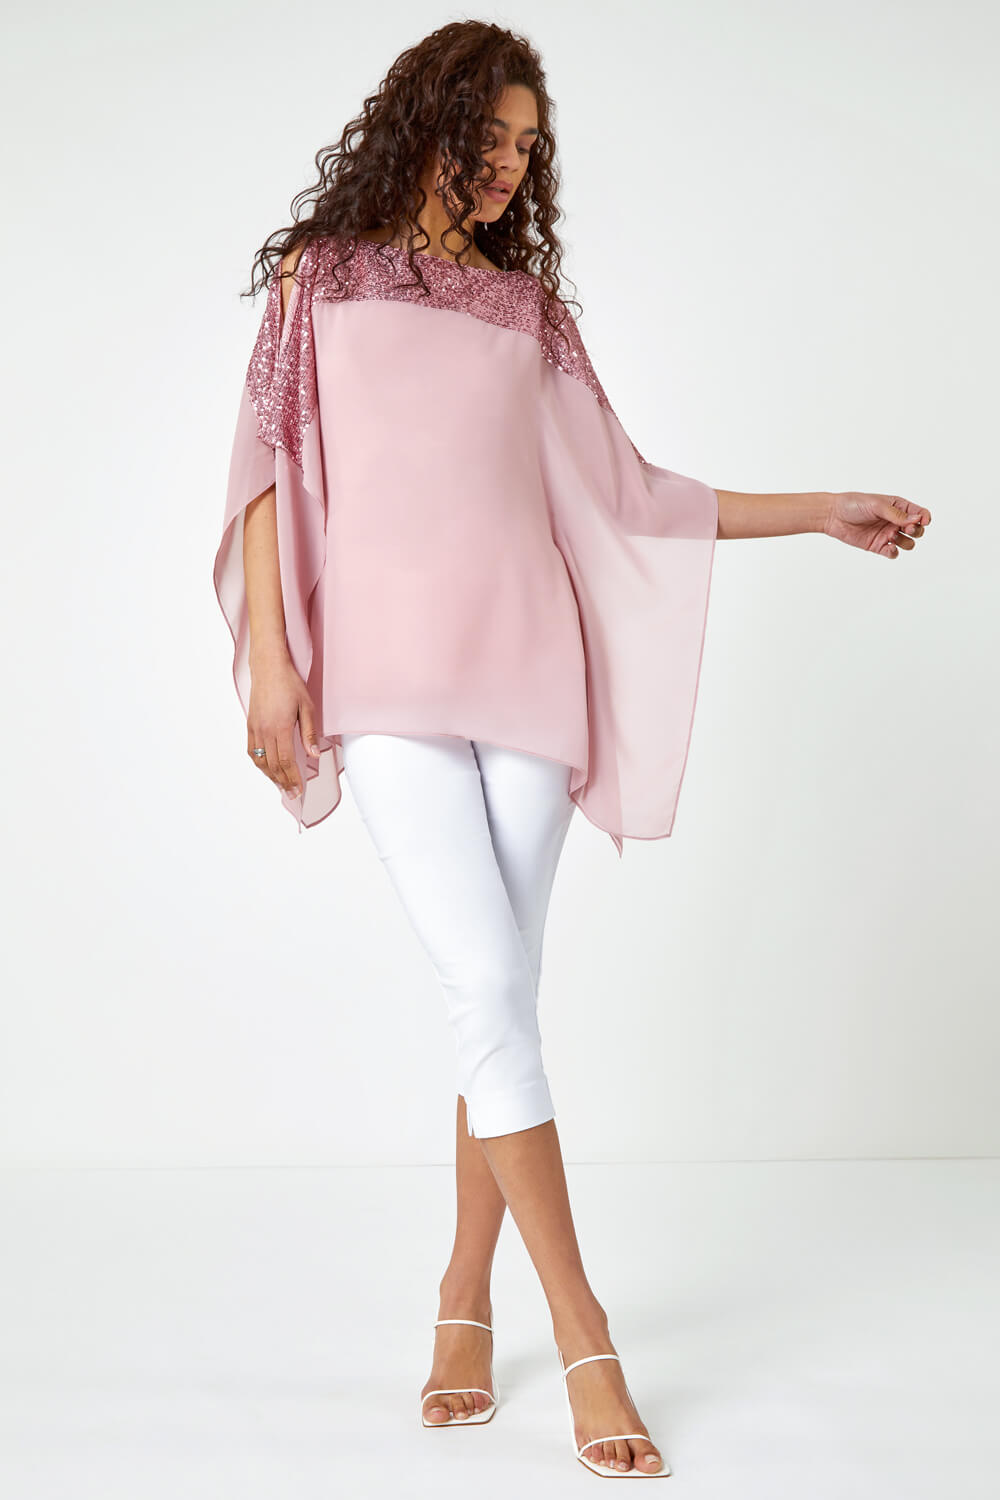 Rose Sequin Embellished Chiffon Overlay Top, Image 2 of 5